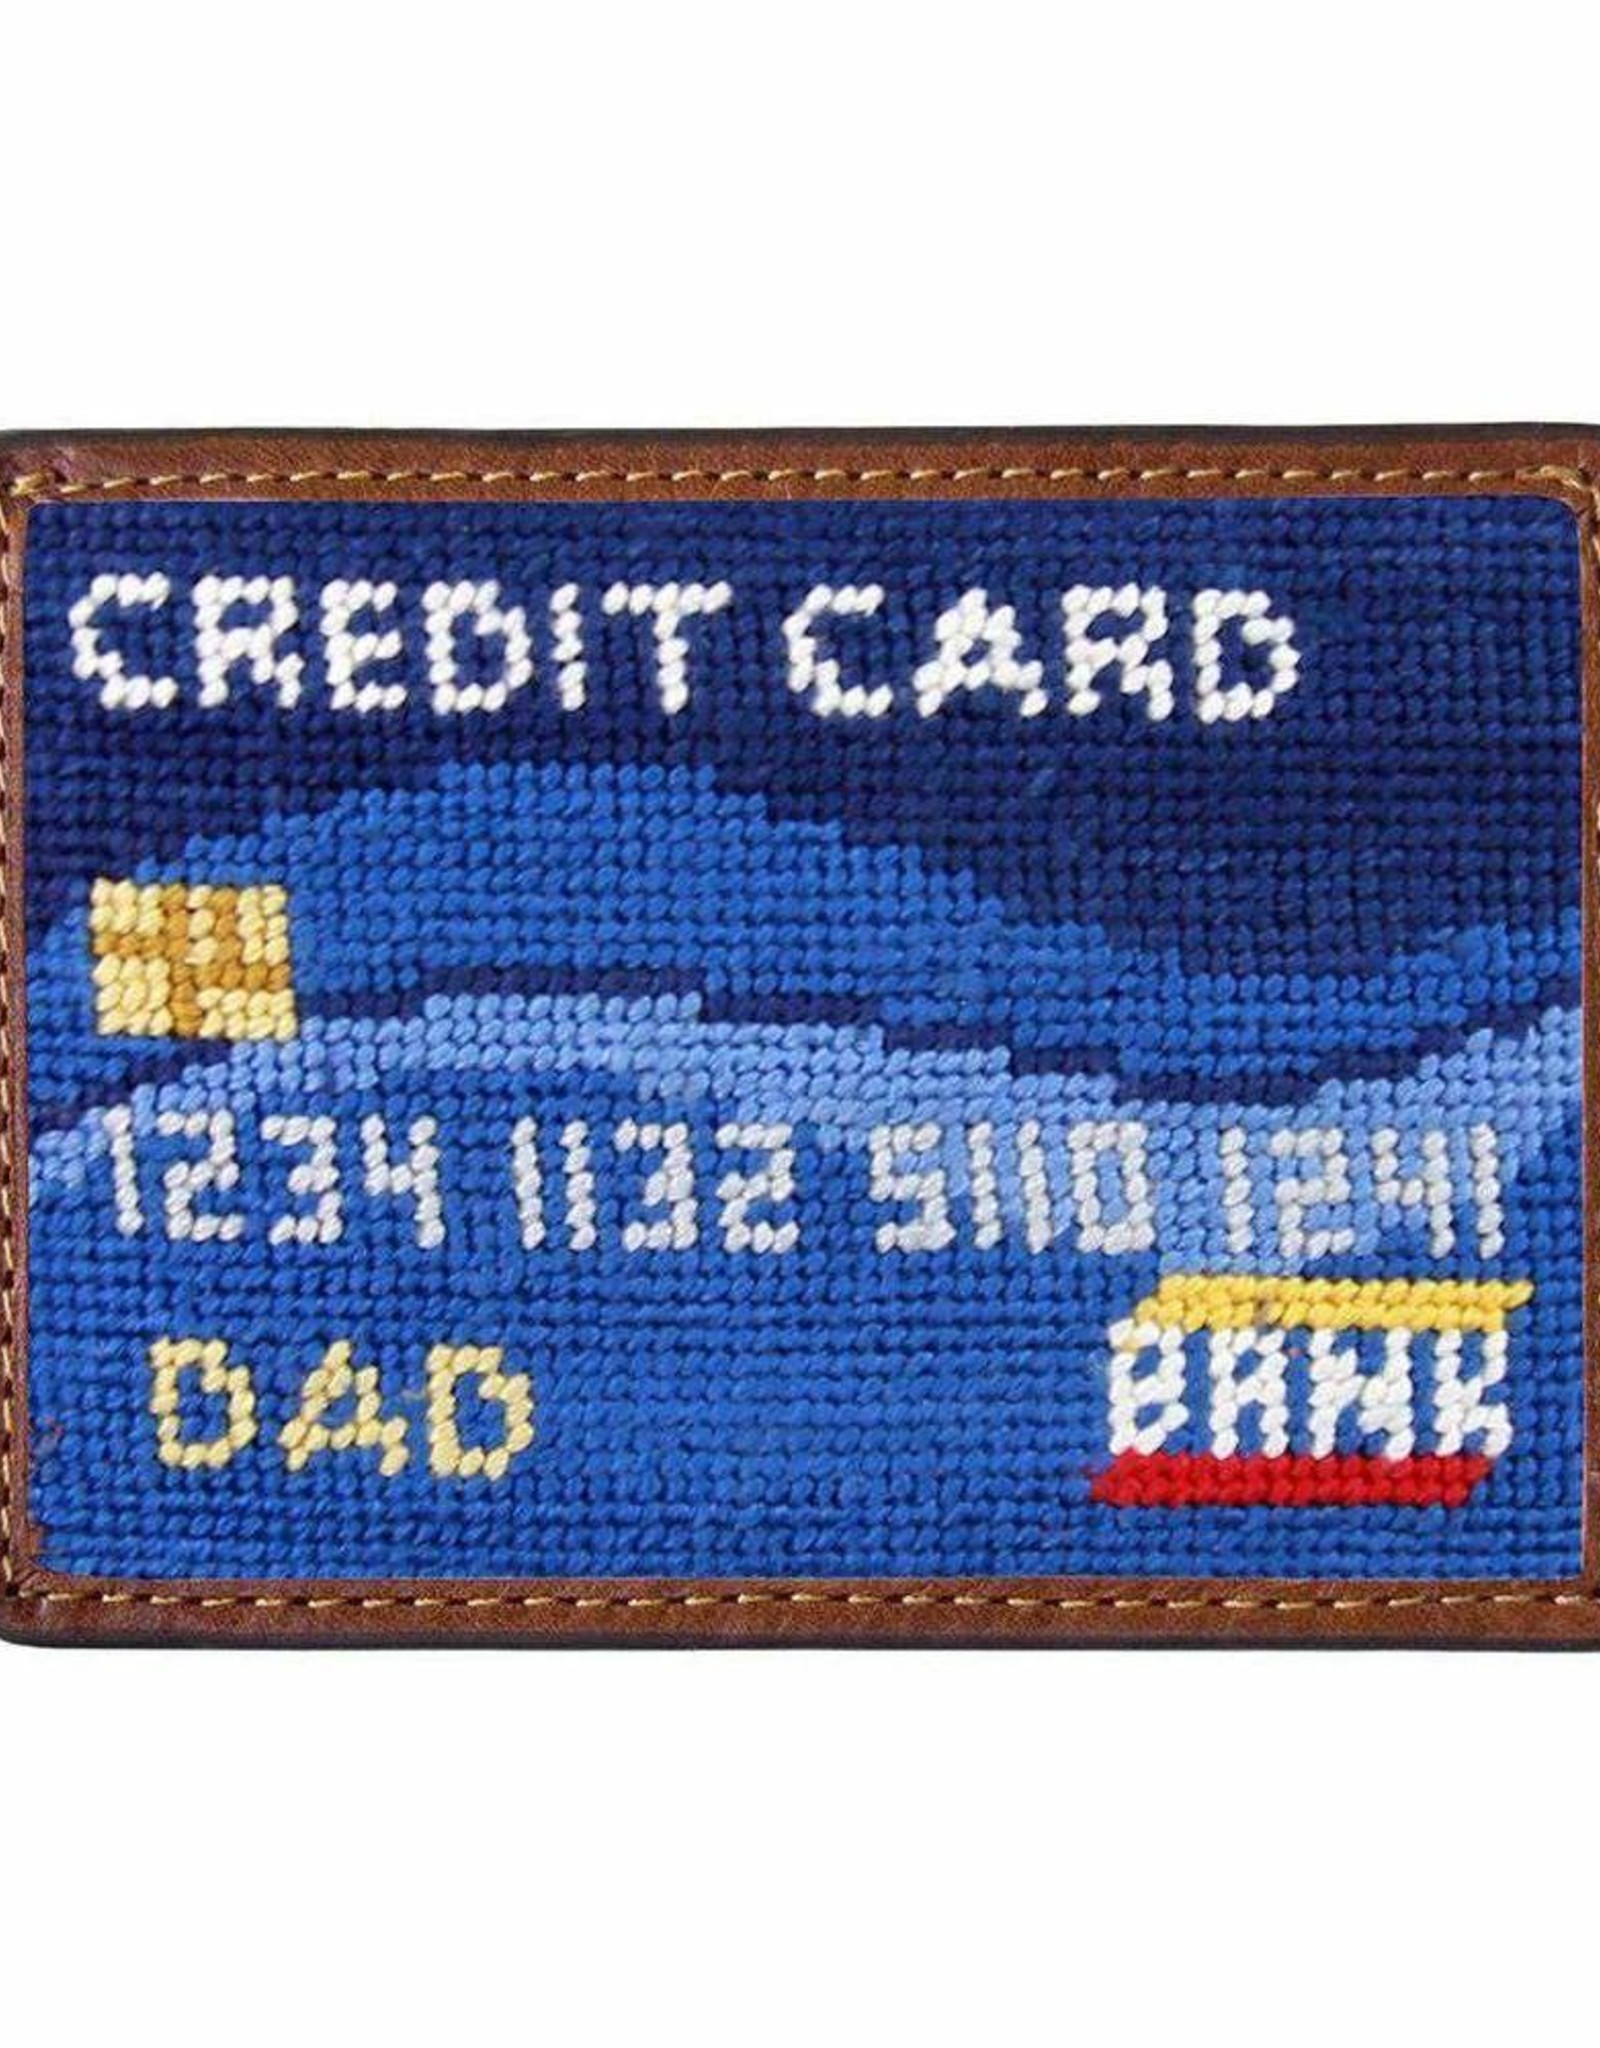 Smathers and Branson Needlepoint Credit Card Wallet with Leather